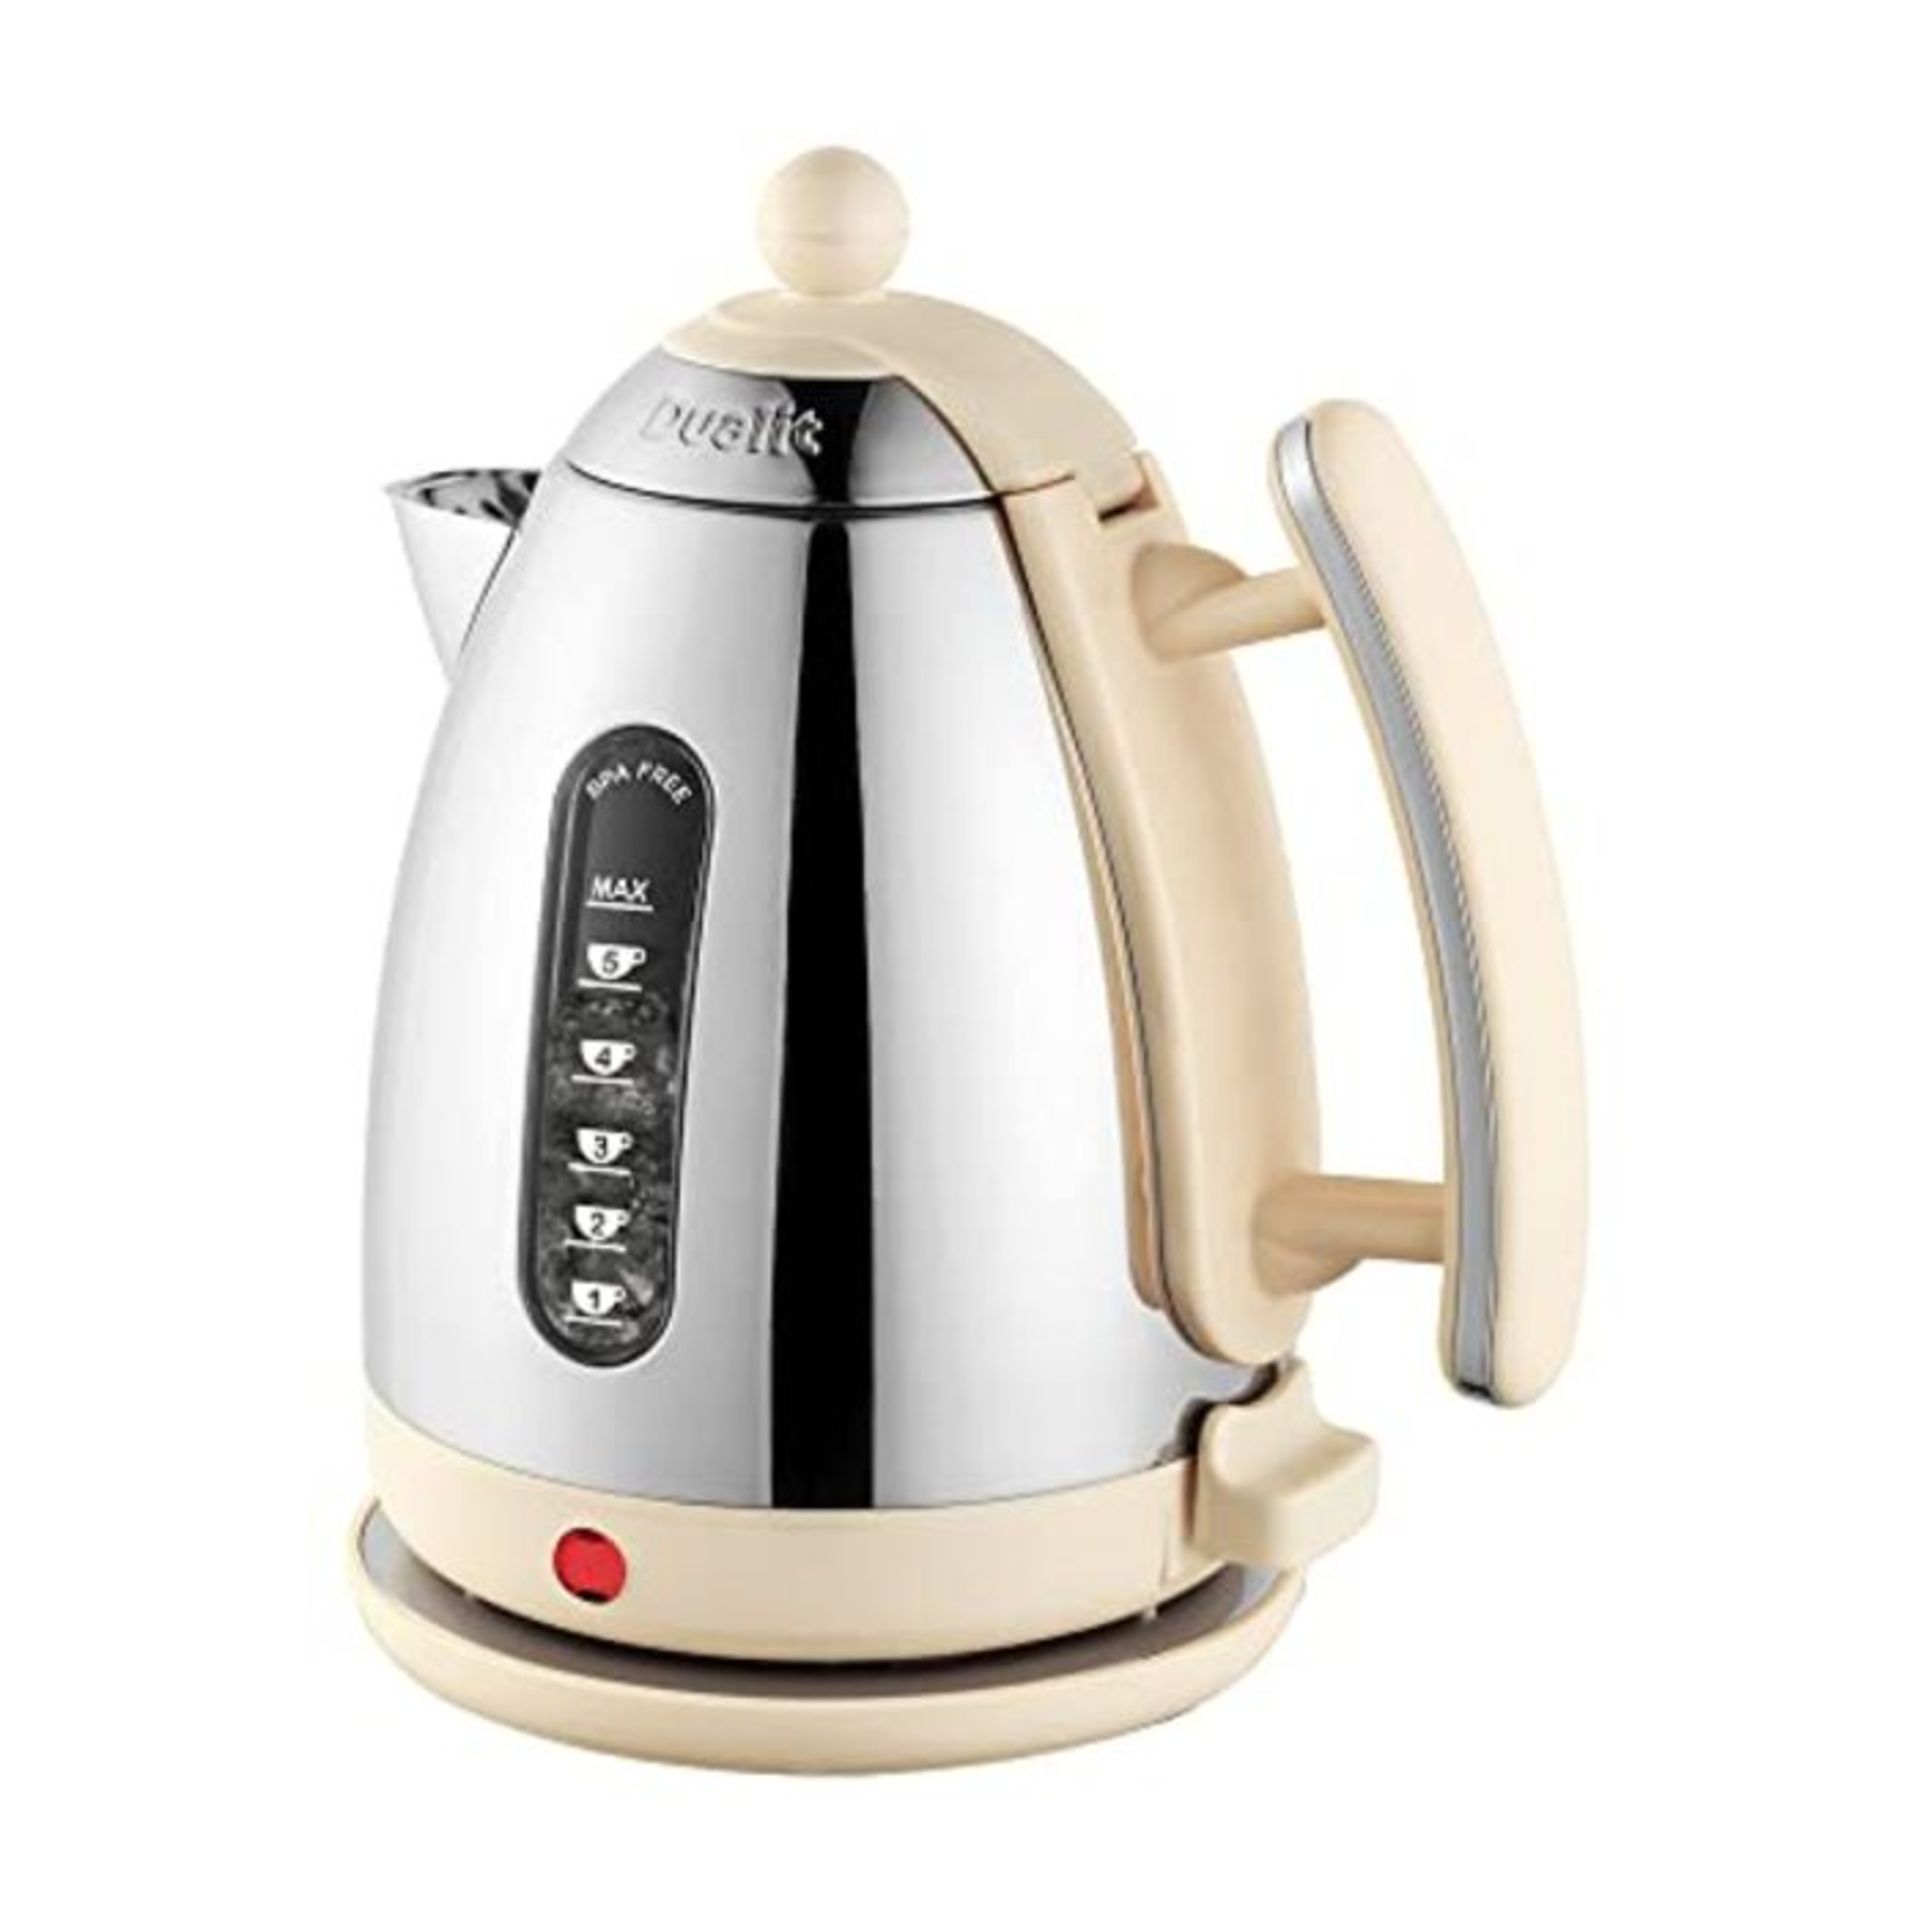 RRP £68.00 Dualit Lite Kettle - 1.5L Jug Kettle - Polished with Cream Trim, High Gloss Finish - F